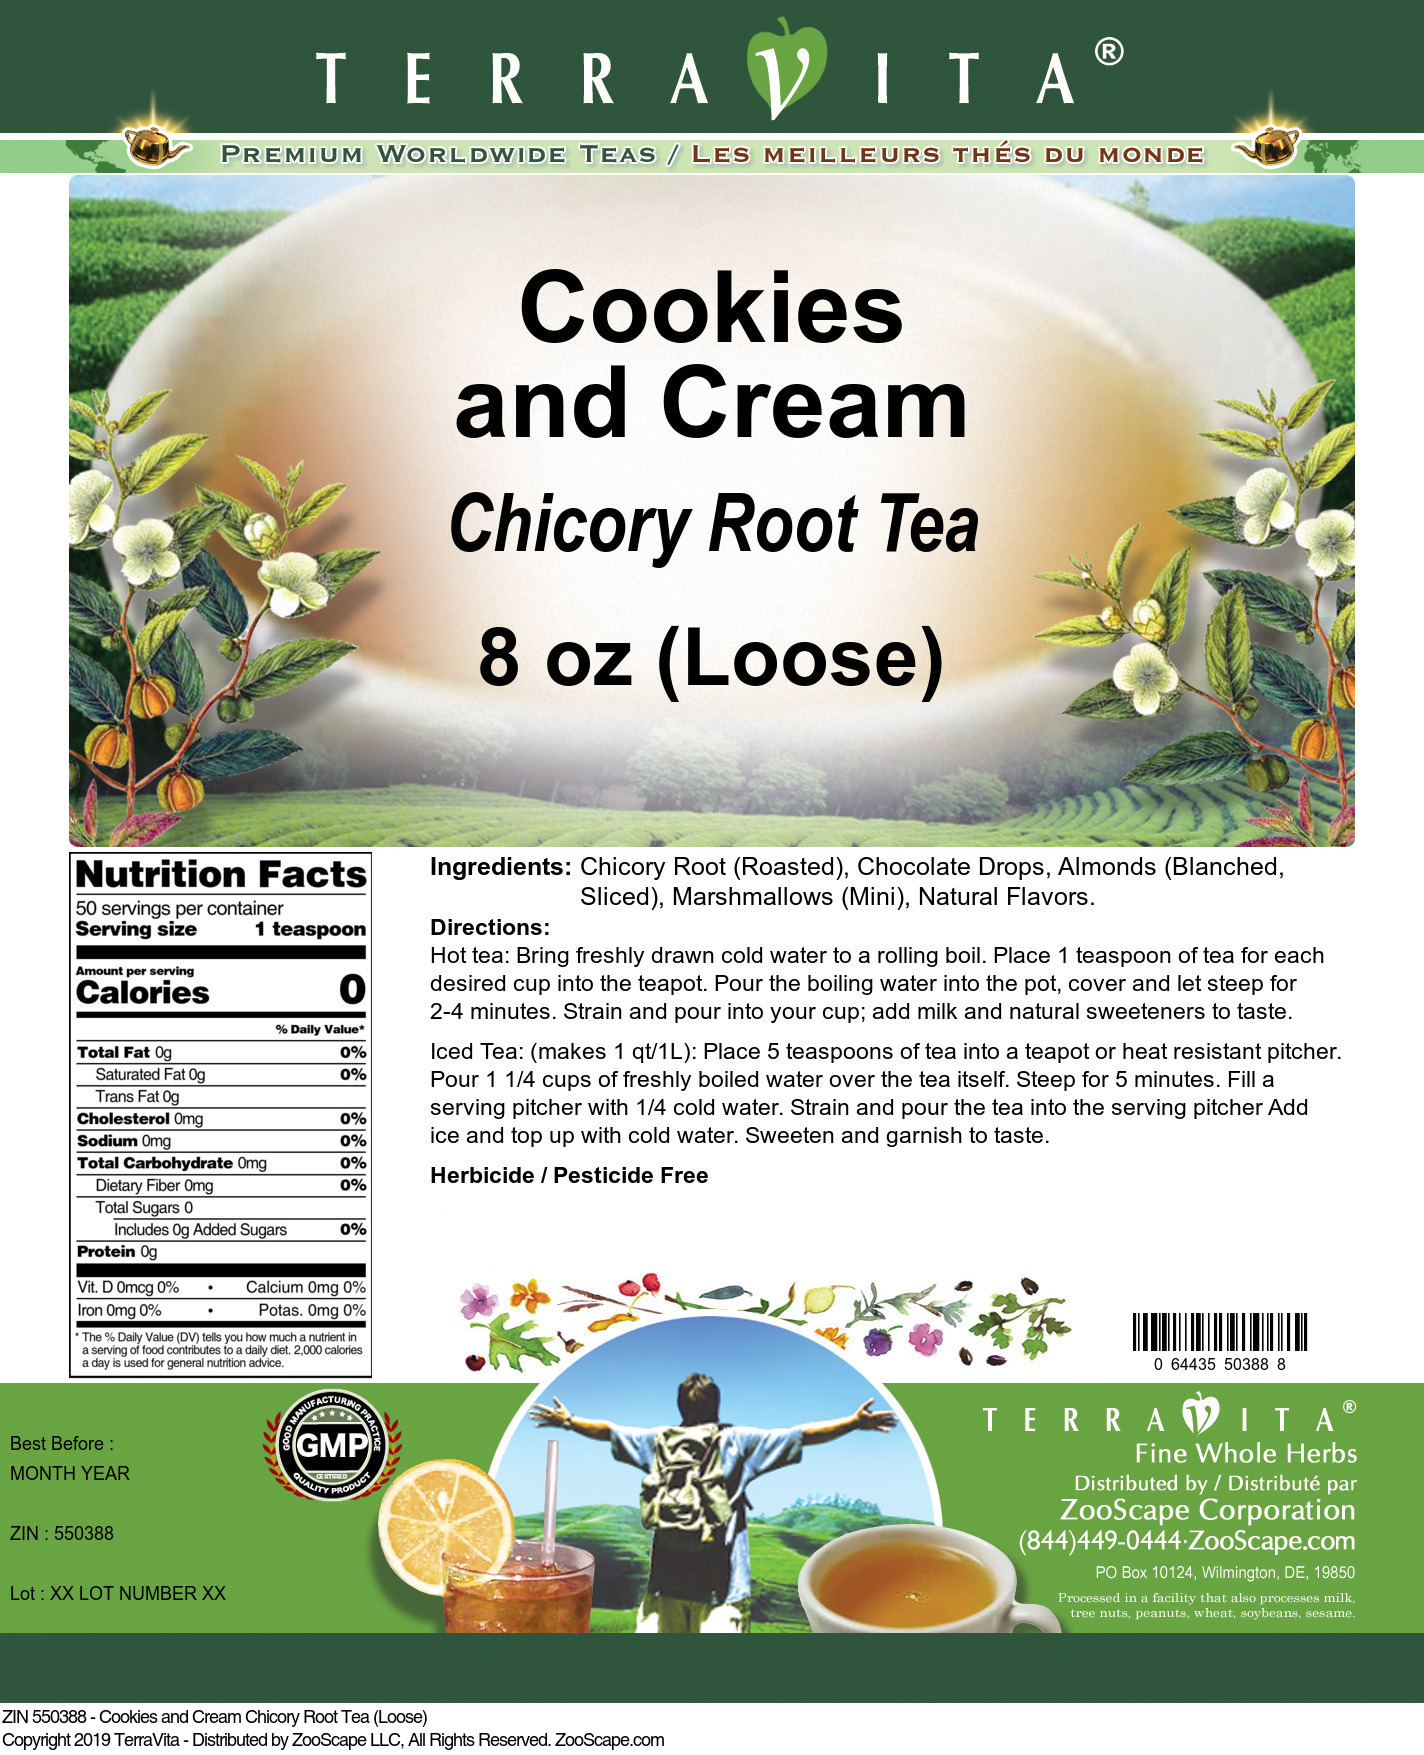 Cookies and Cream Chicory Root Tea (Loose) - Label